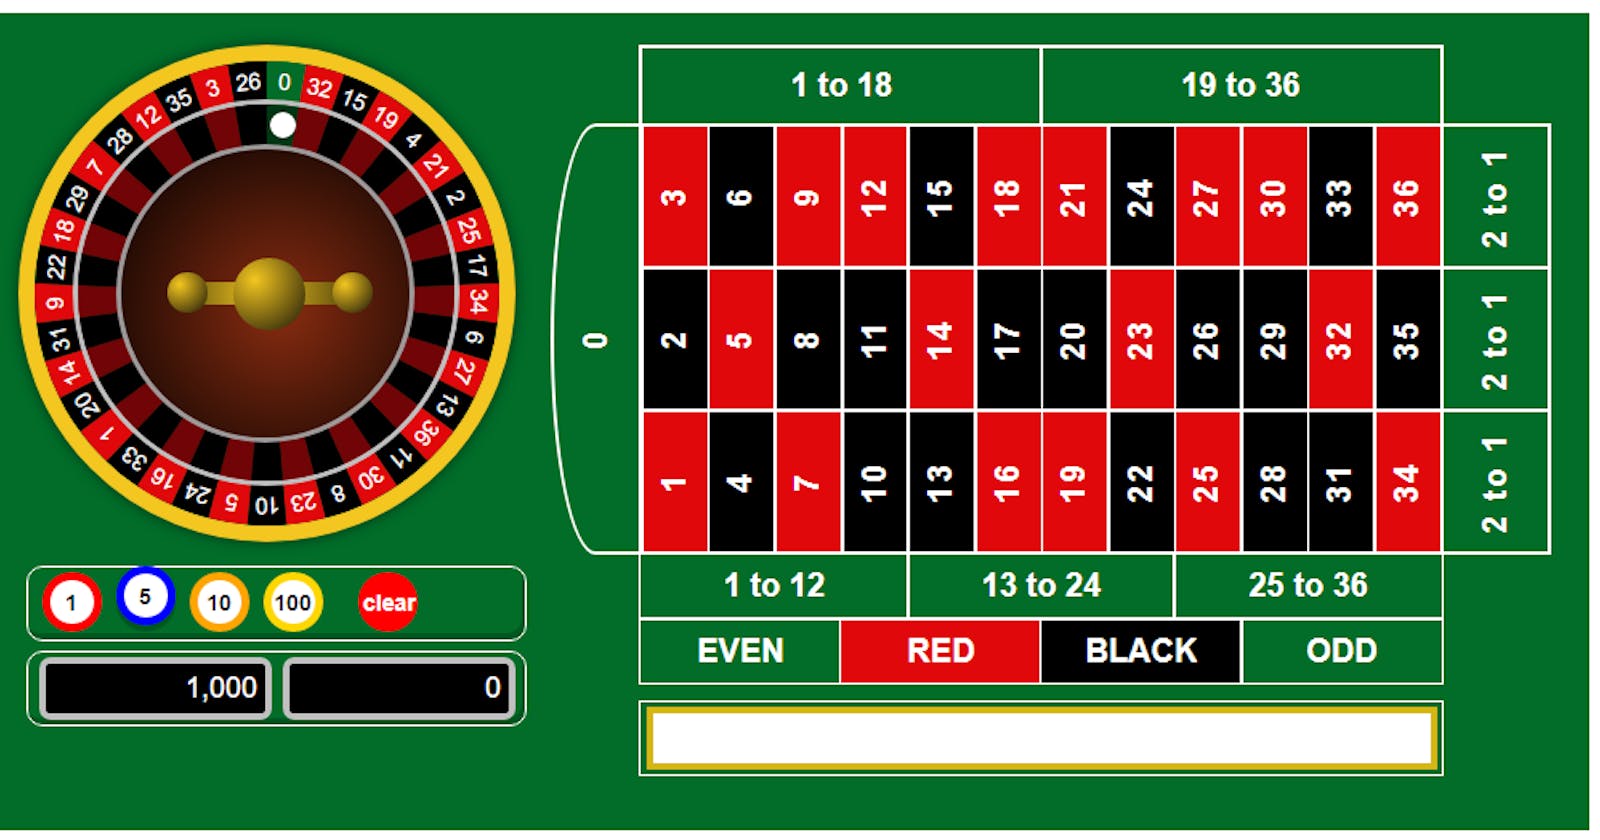 One way to make Roulette using Javascript - Part 3